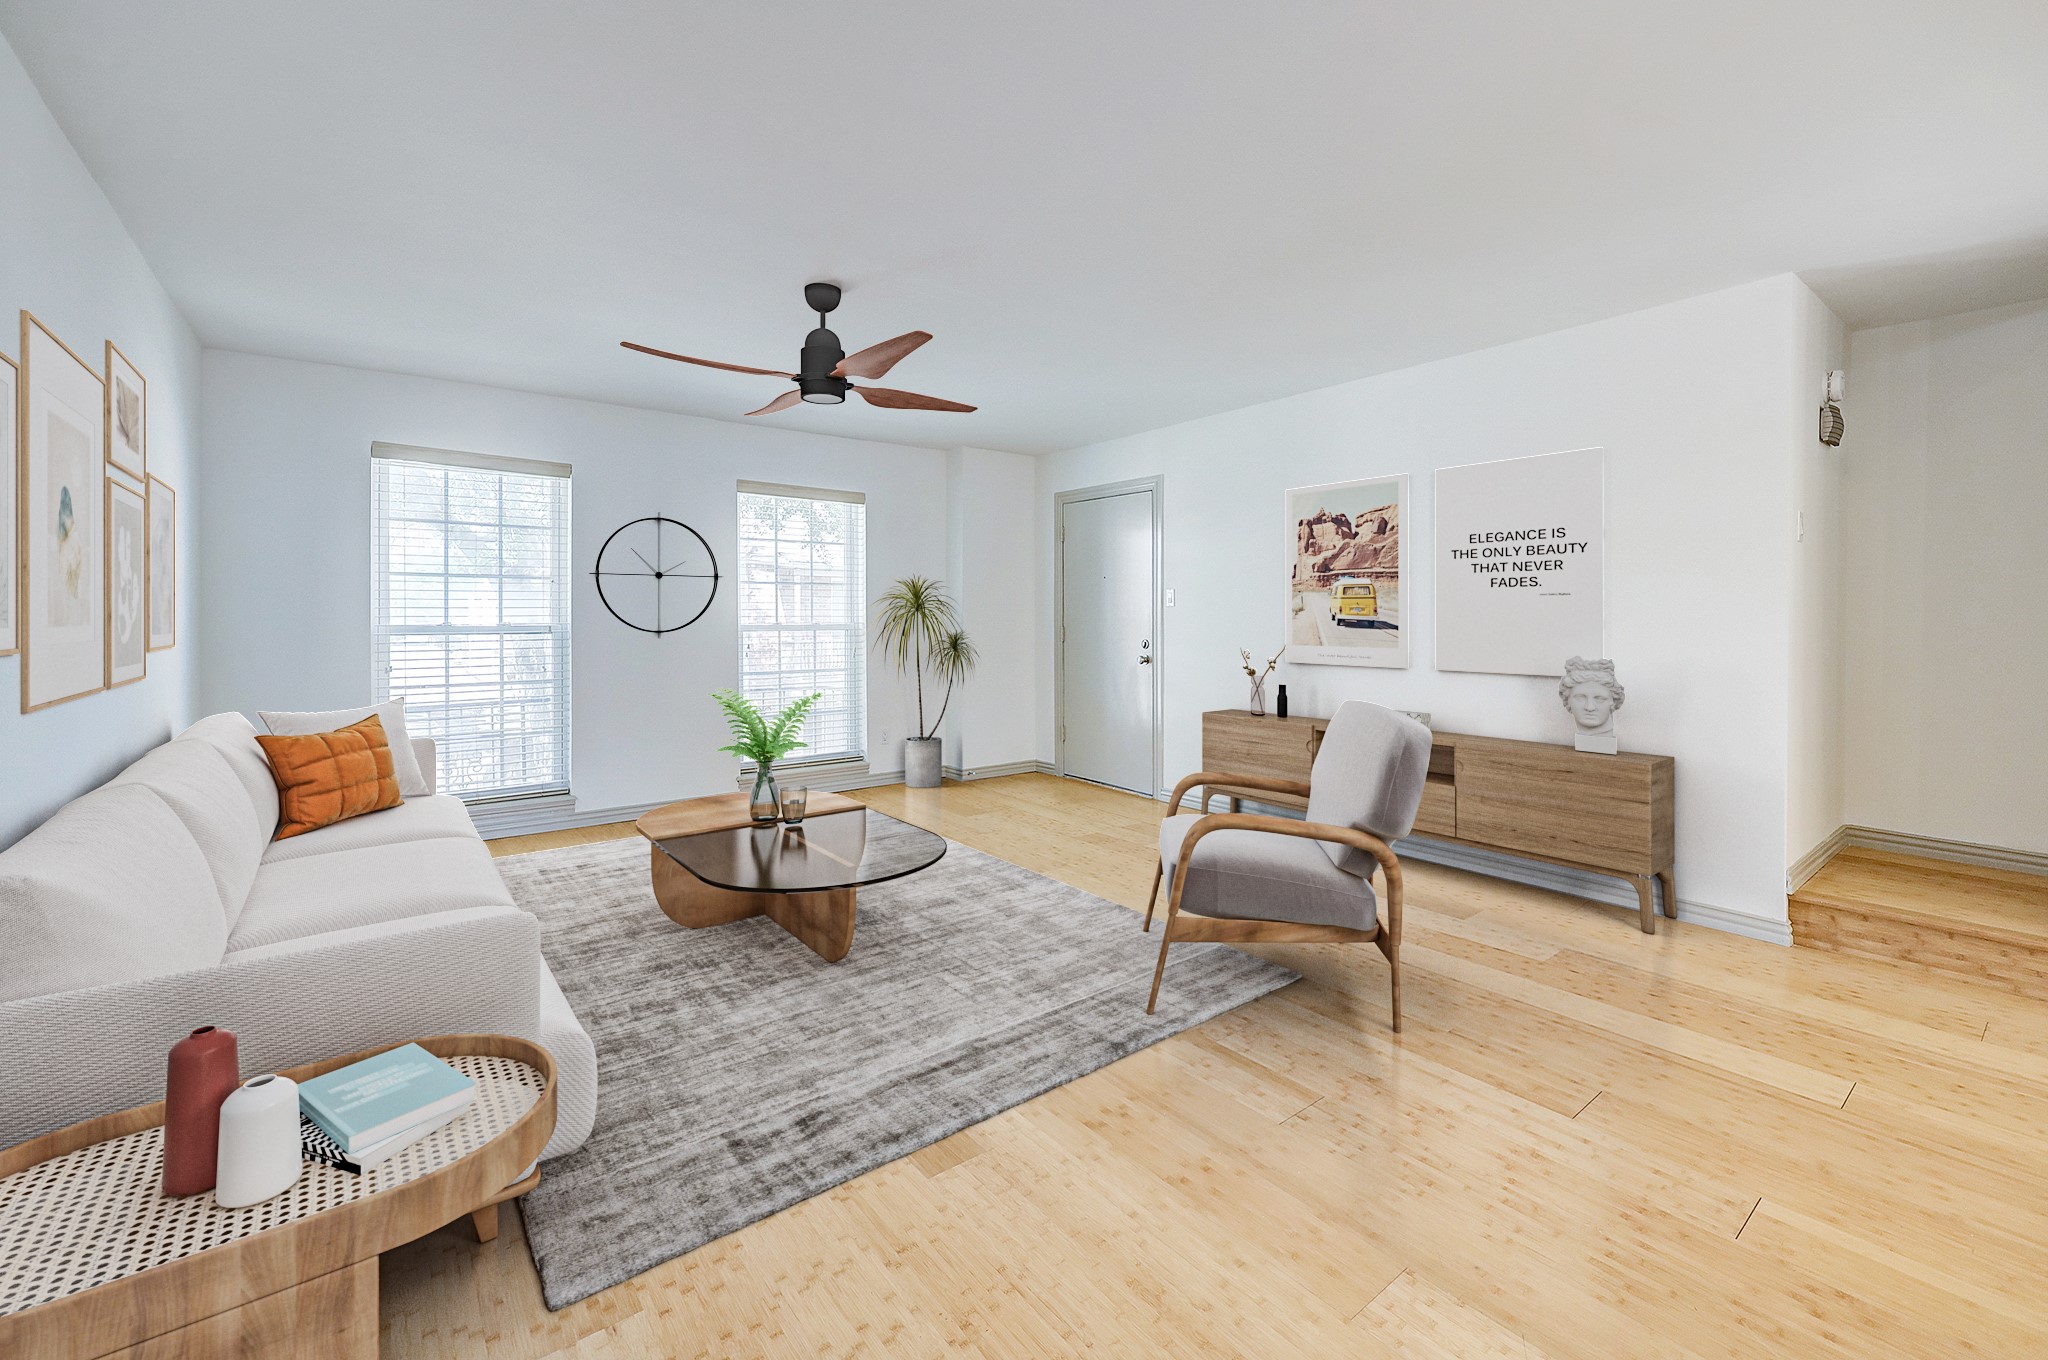 The large living room overlooks the community pool and invites natural light into the home. Wood-like flooring provides easy maintenance and runs throughout the home.